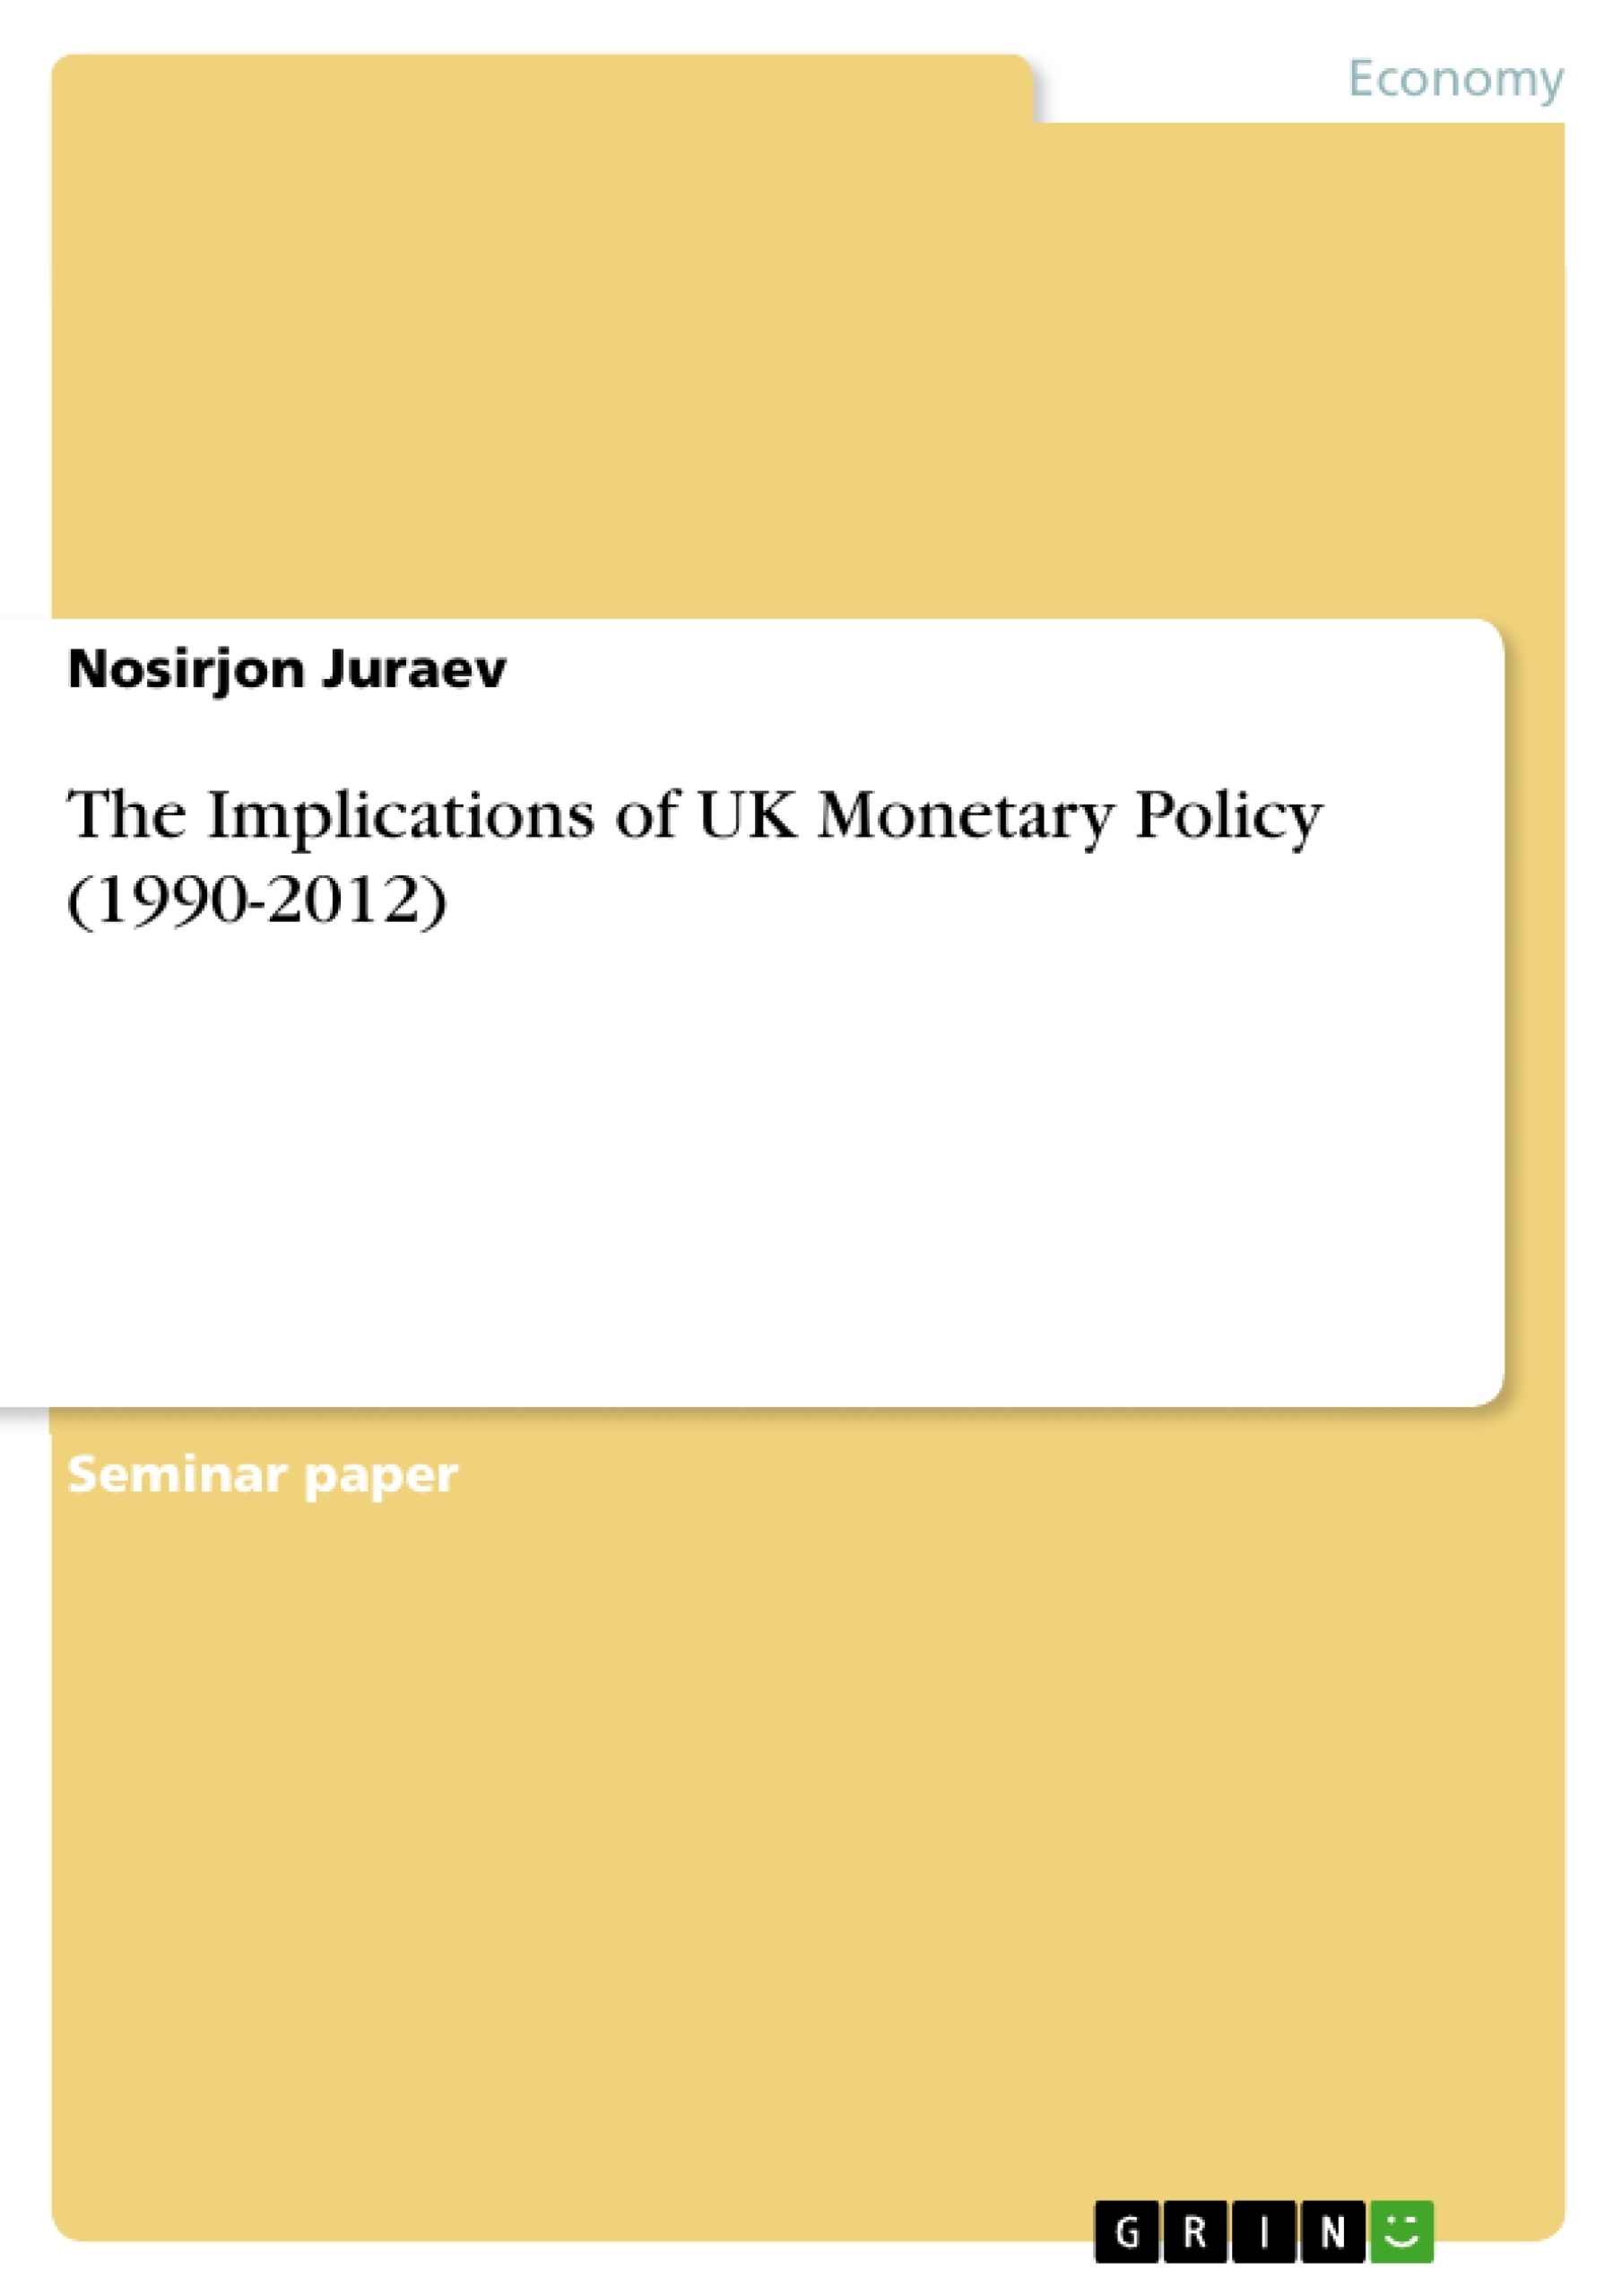 Title: The Implications of UK Monetary Policy (1990-2012)